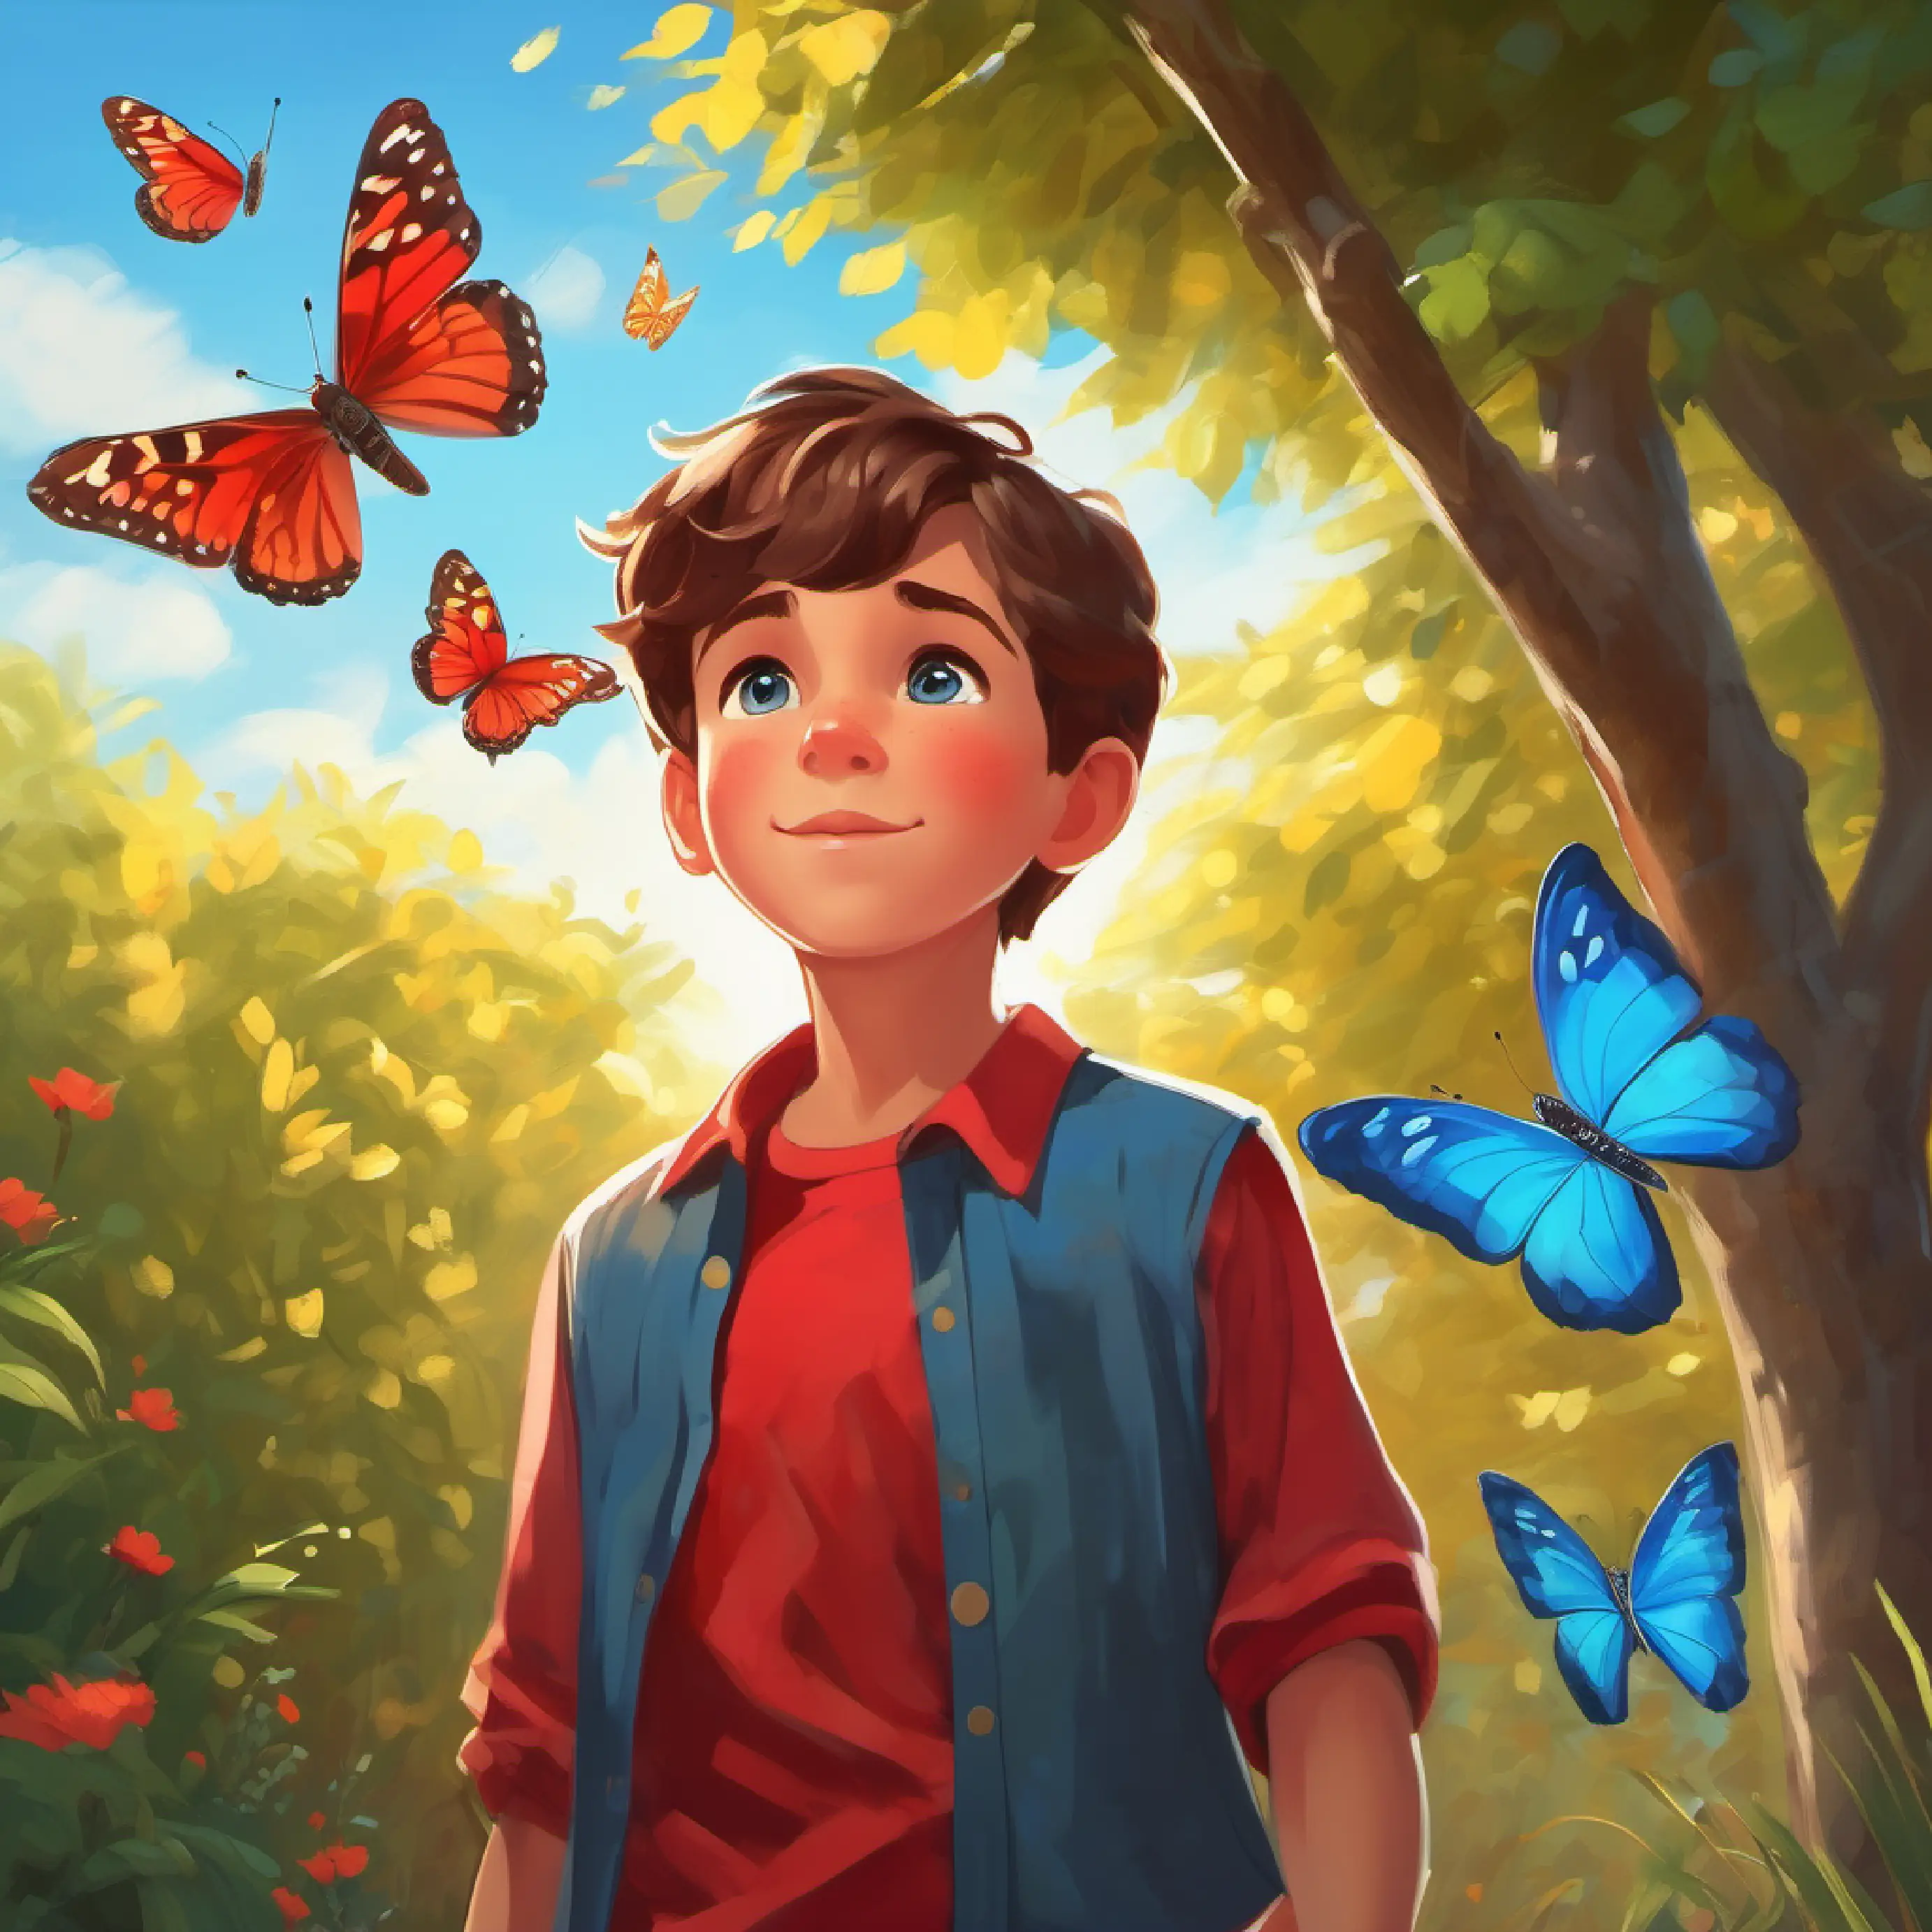 Young boy, short brown hair, bright blue eyes, wearing a red shirt feels proud after gently catching the butterfly.